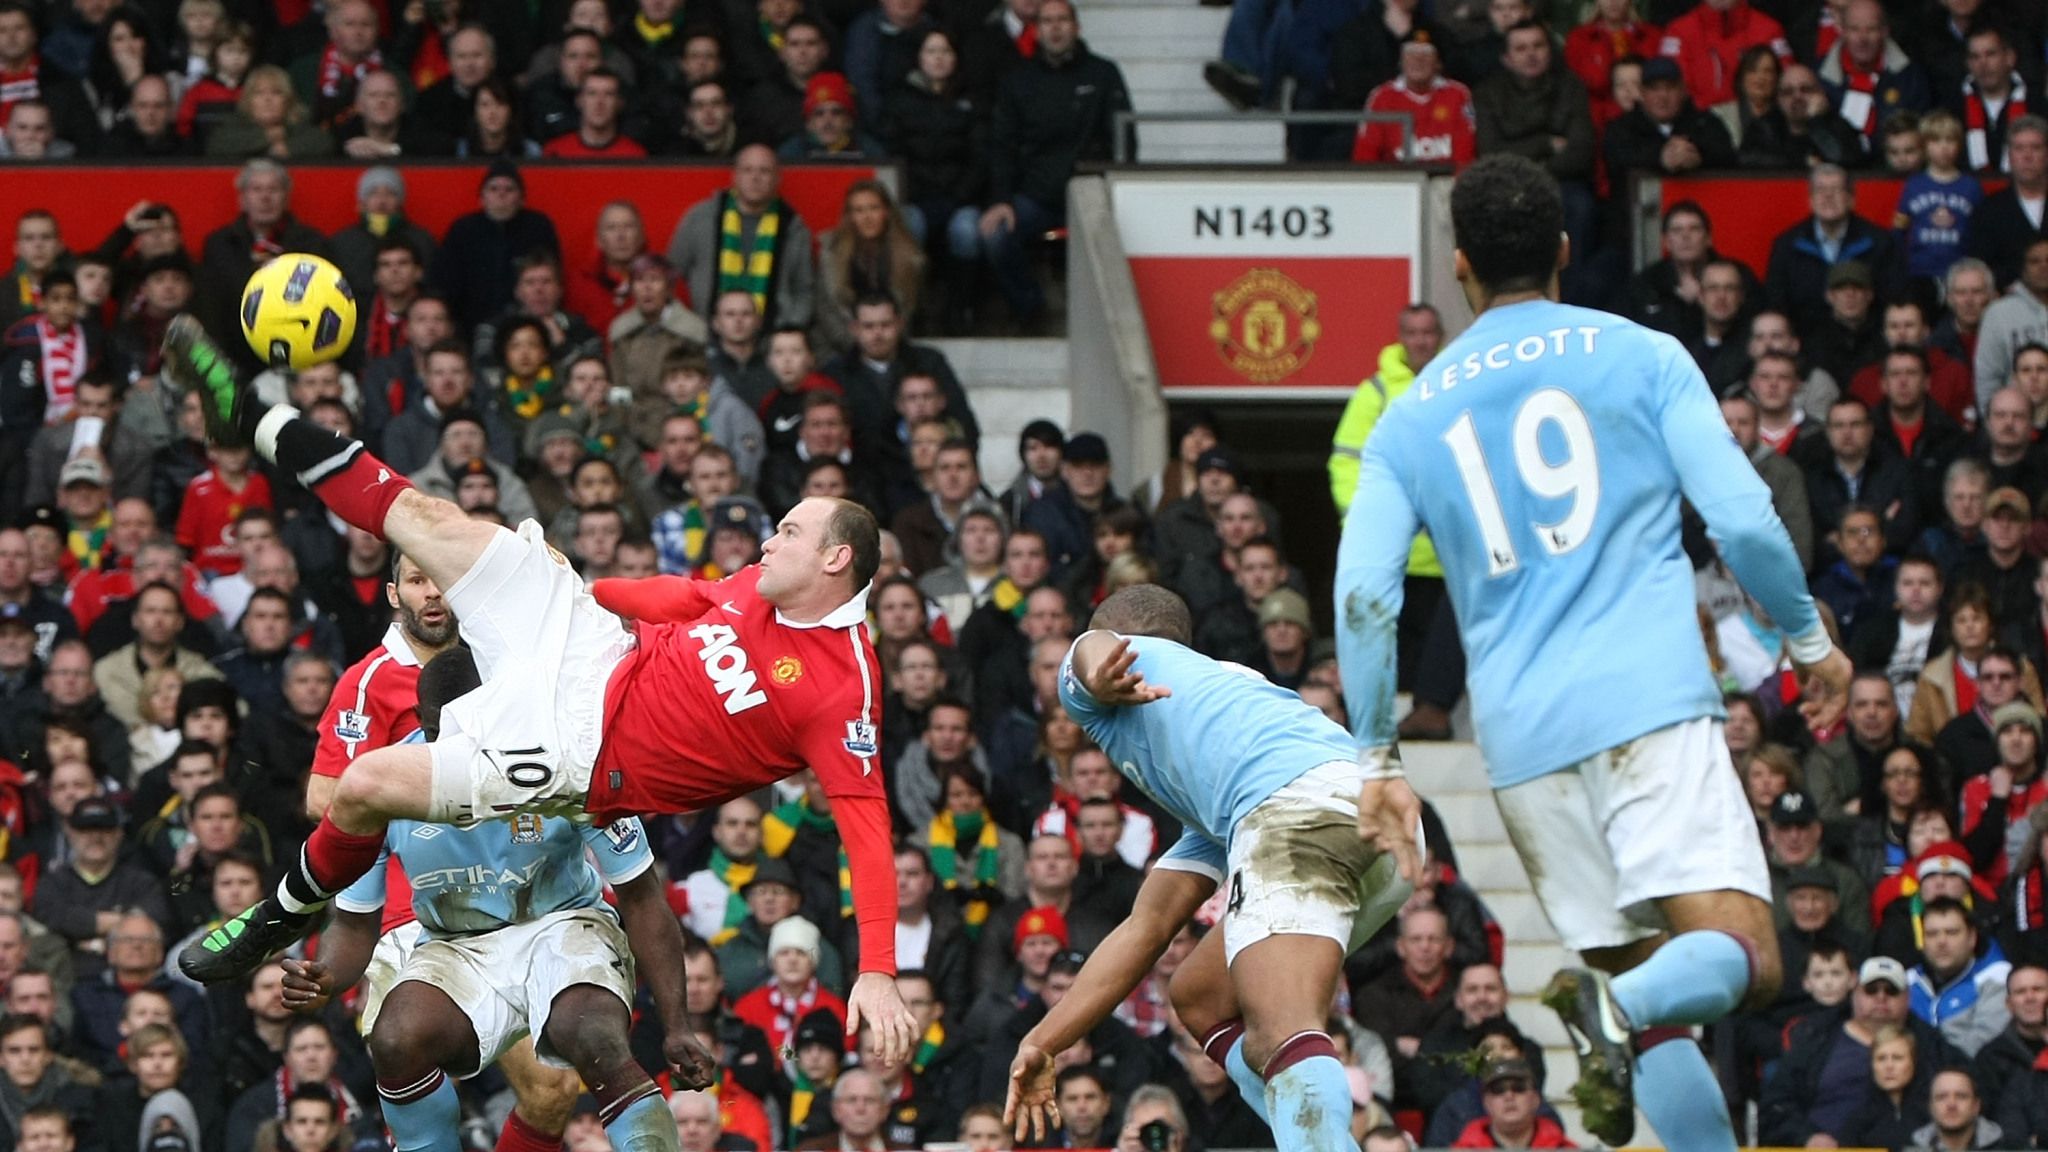 Premier League: Wayne Rooney's famous bicycle kick in Manchester Derby